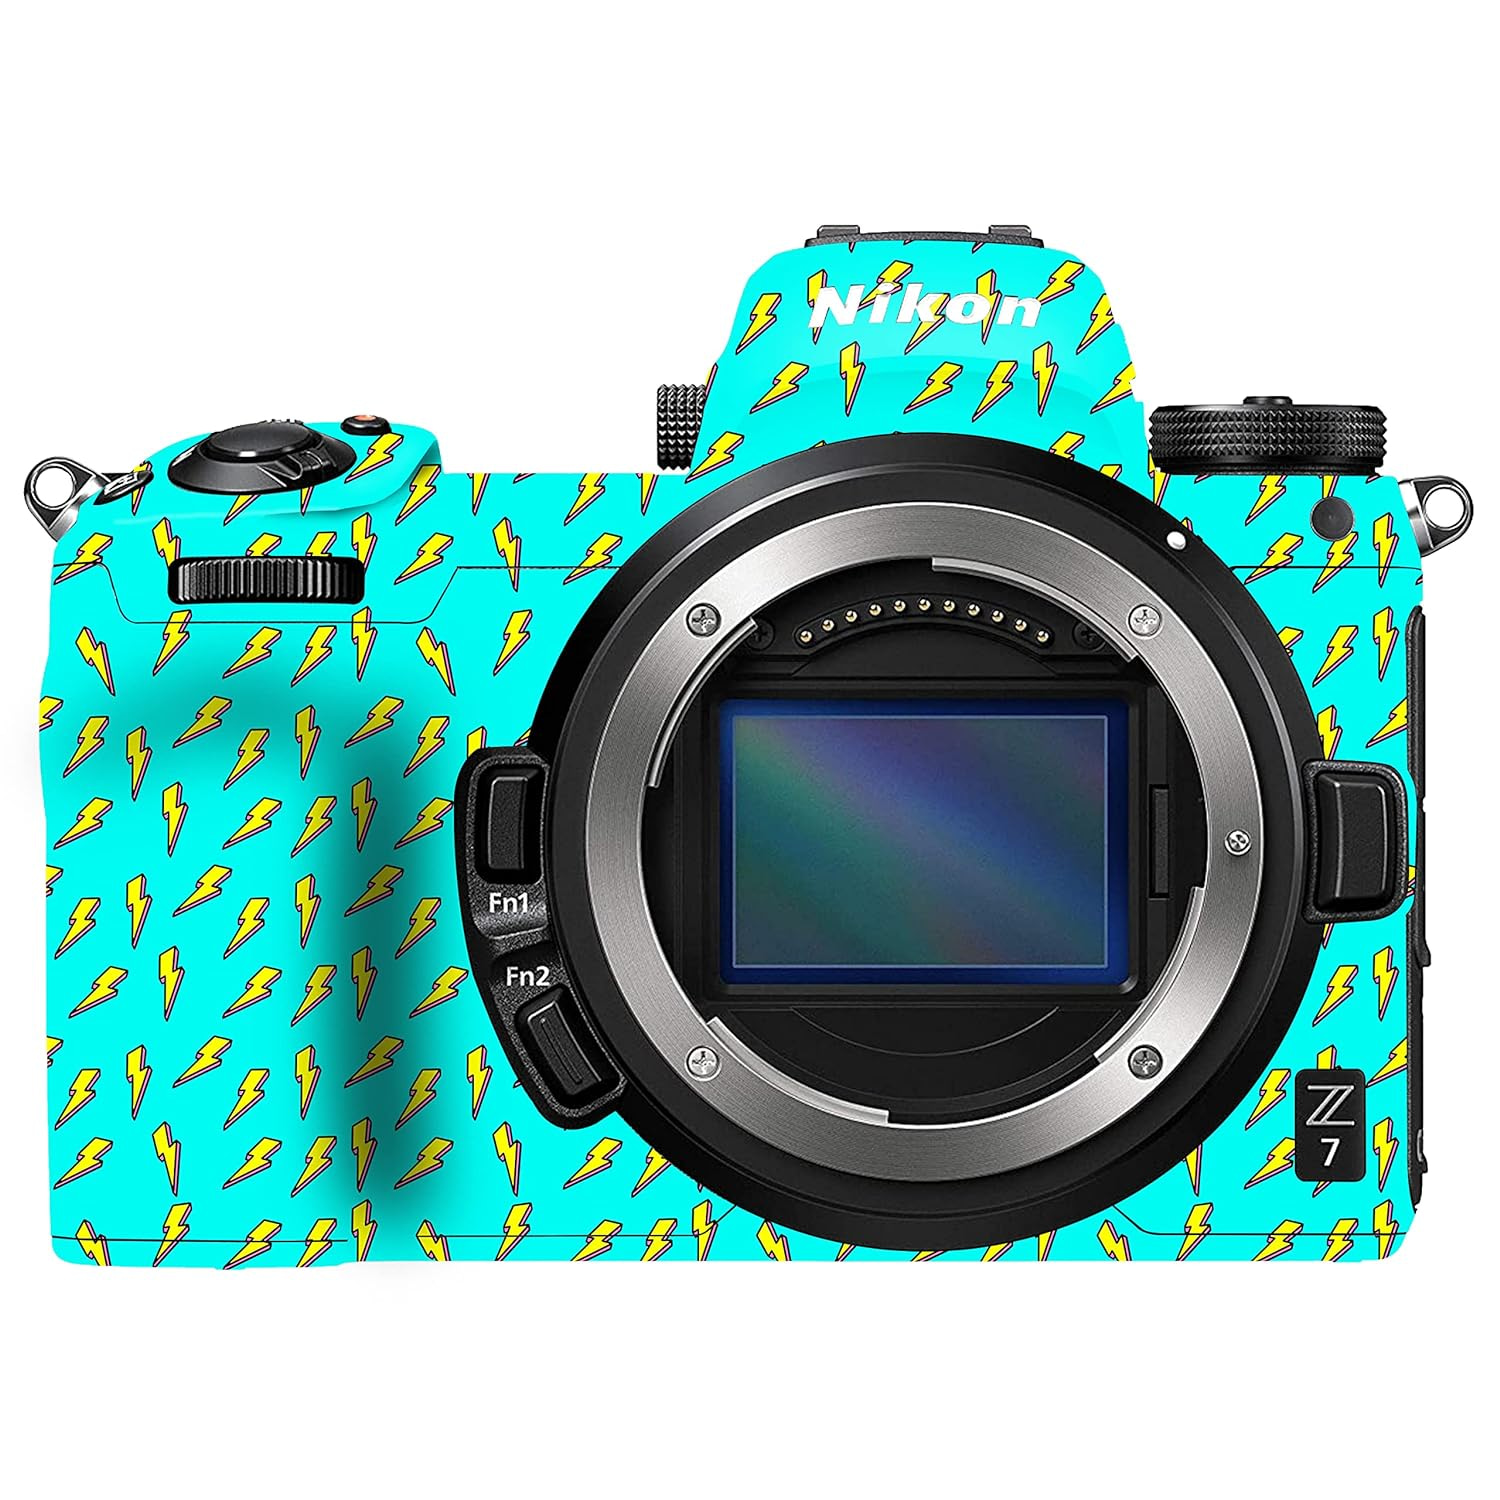 Read more about the article WRAPTURE. Premium DSLR Camera Scratchproof Protective Skin for Nikon Z7 – No Residue Removal, Bubble Free, Scratch Resistant, Stretchable, HD Quality Printed – HDCS-NIKZ7-051